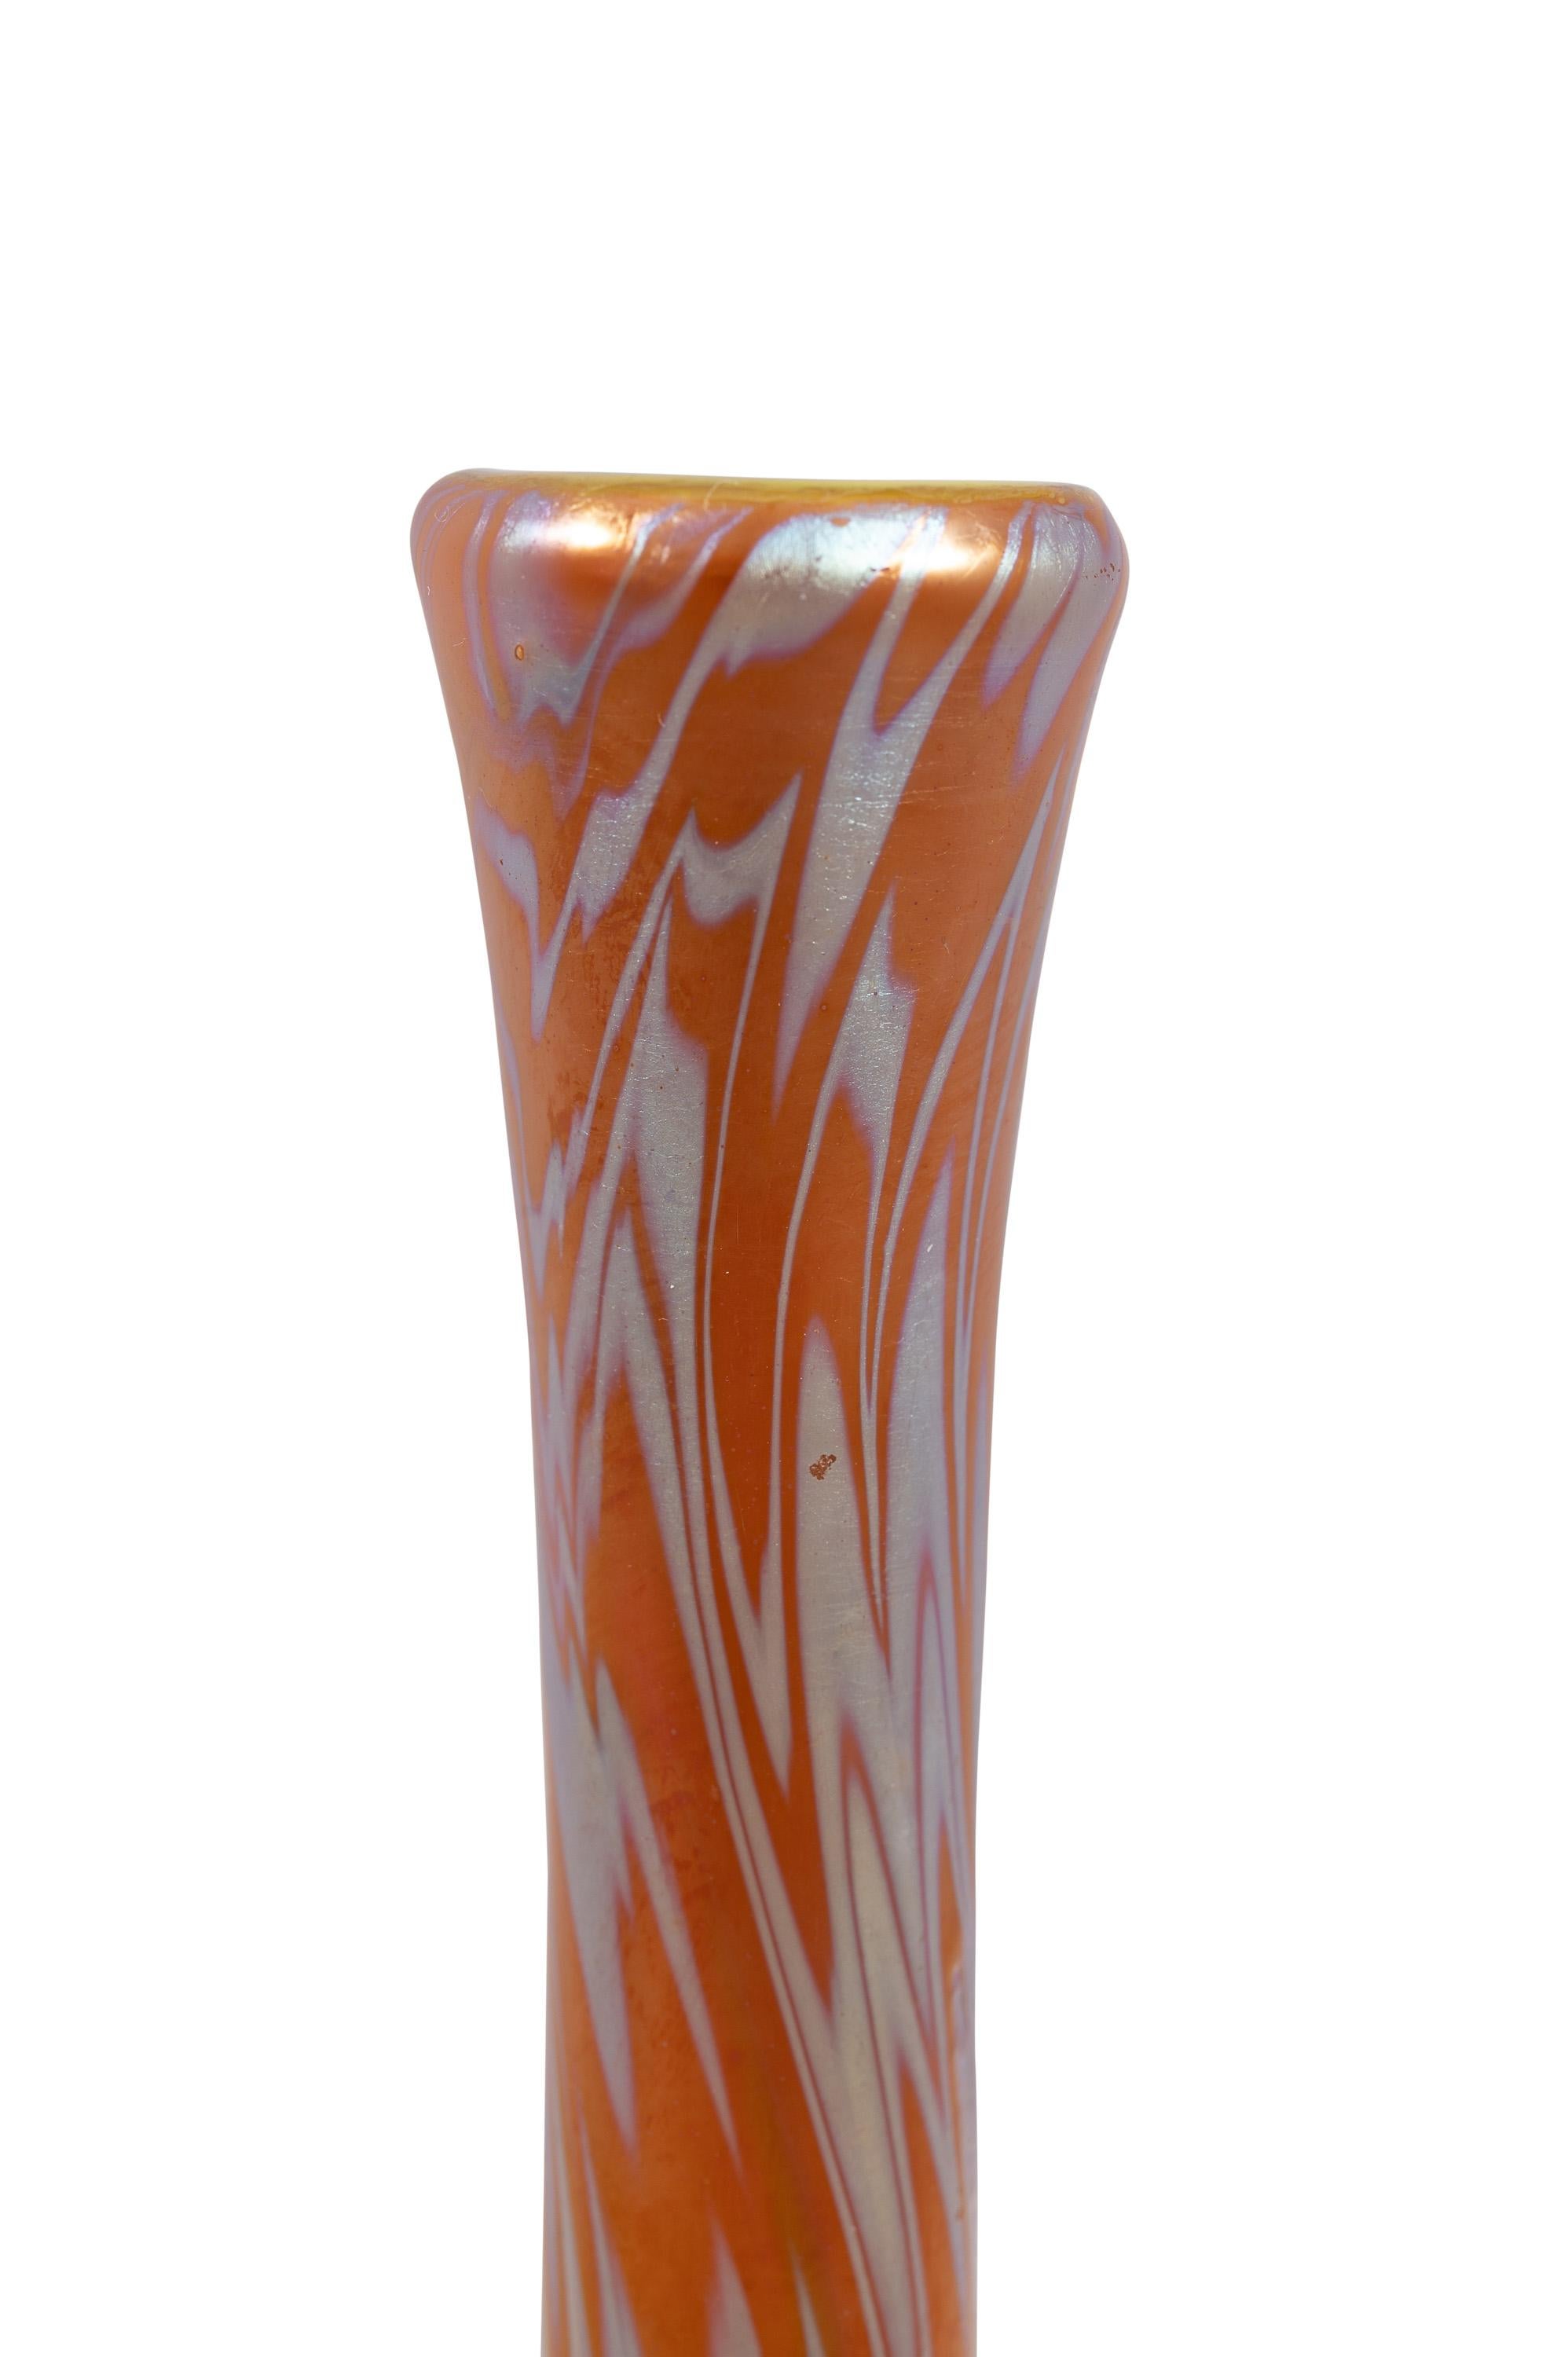 Bohemian Glass Vase Loetz PG 358 circa 1900 Art Nouveau In Good Condition For Sale In Klosterneuburg, AT